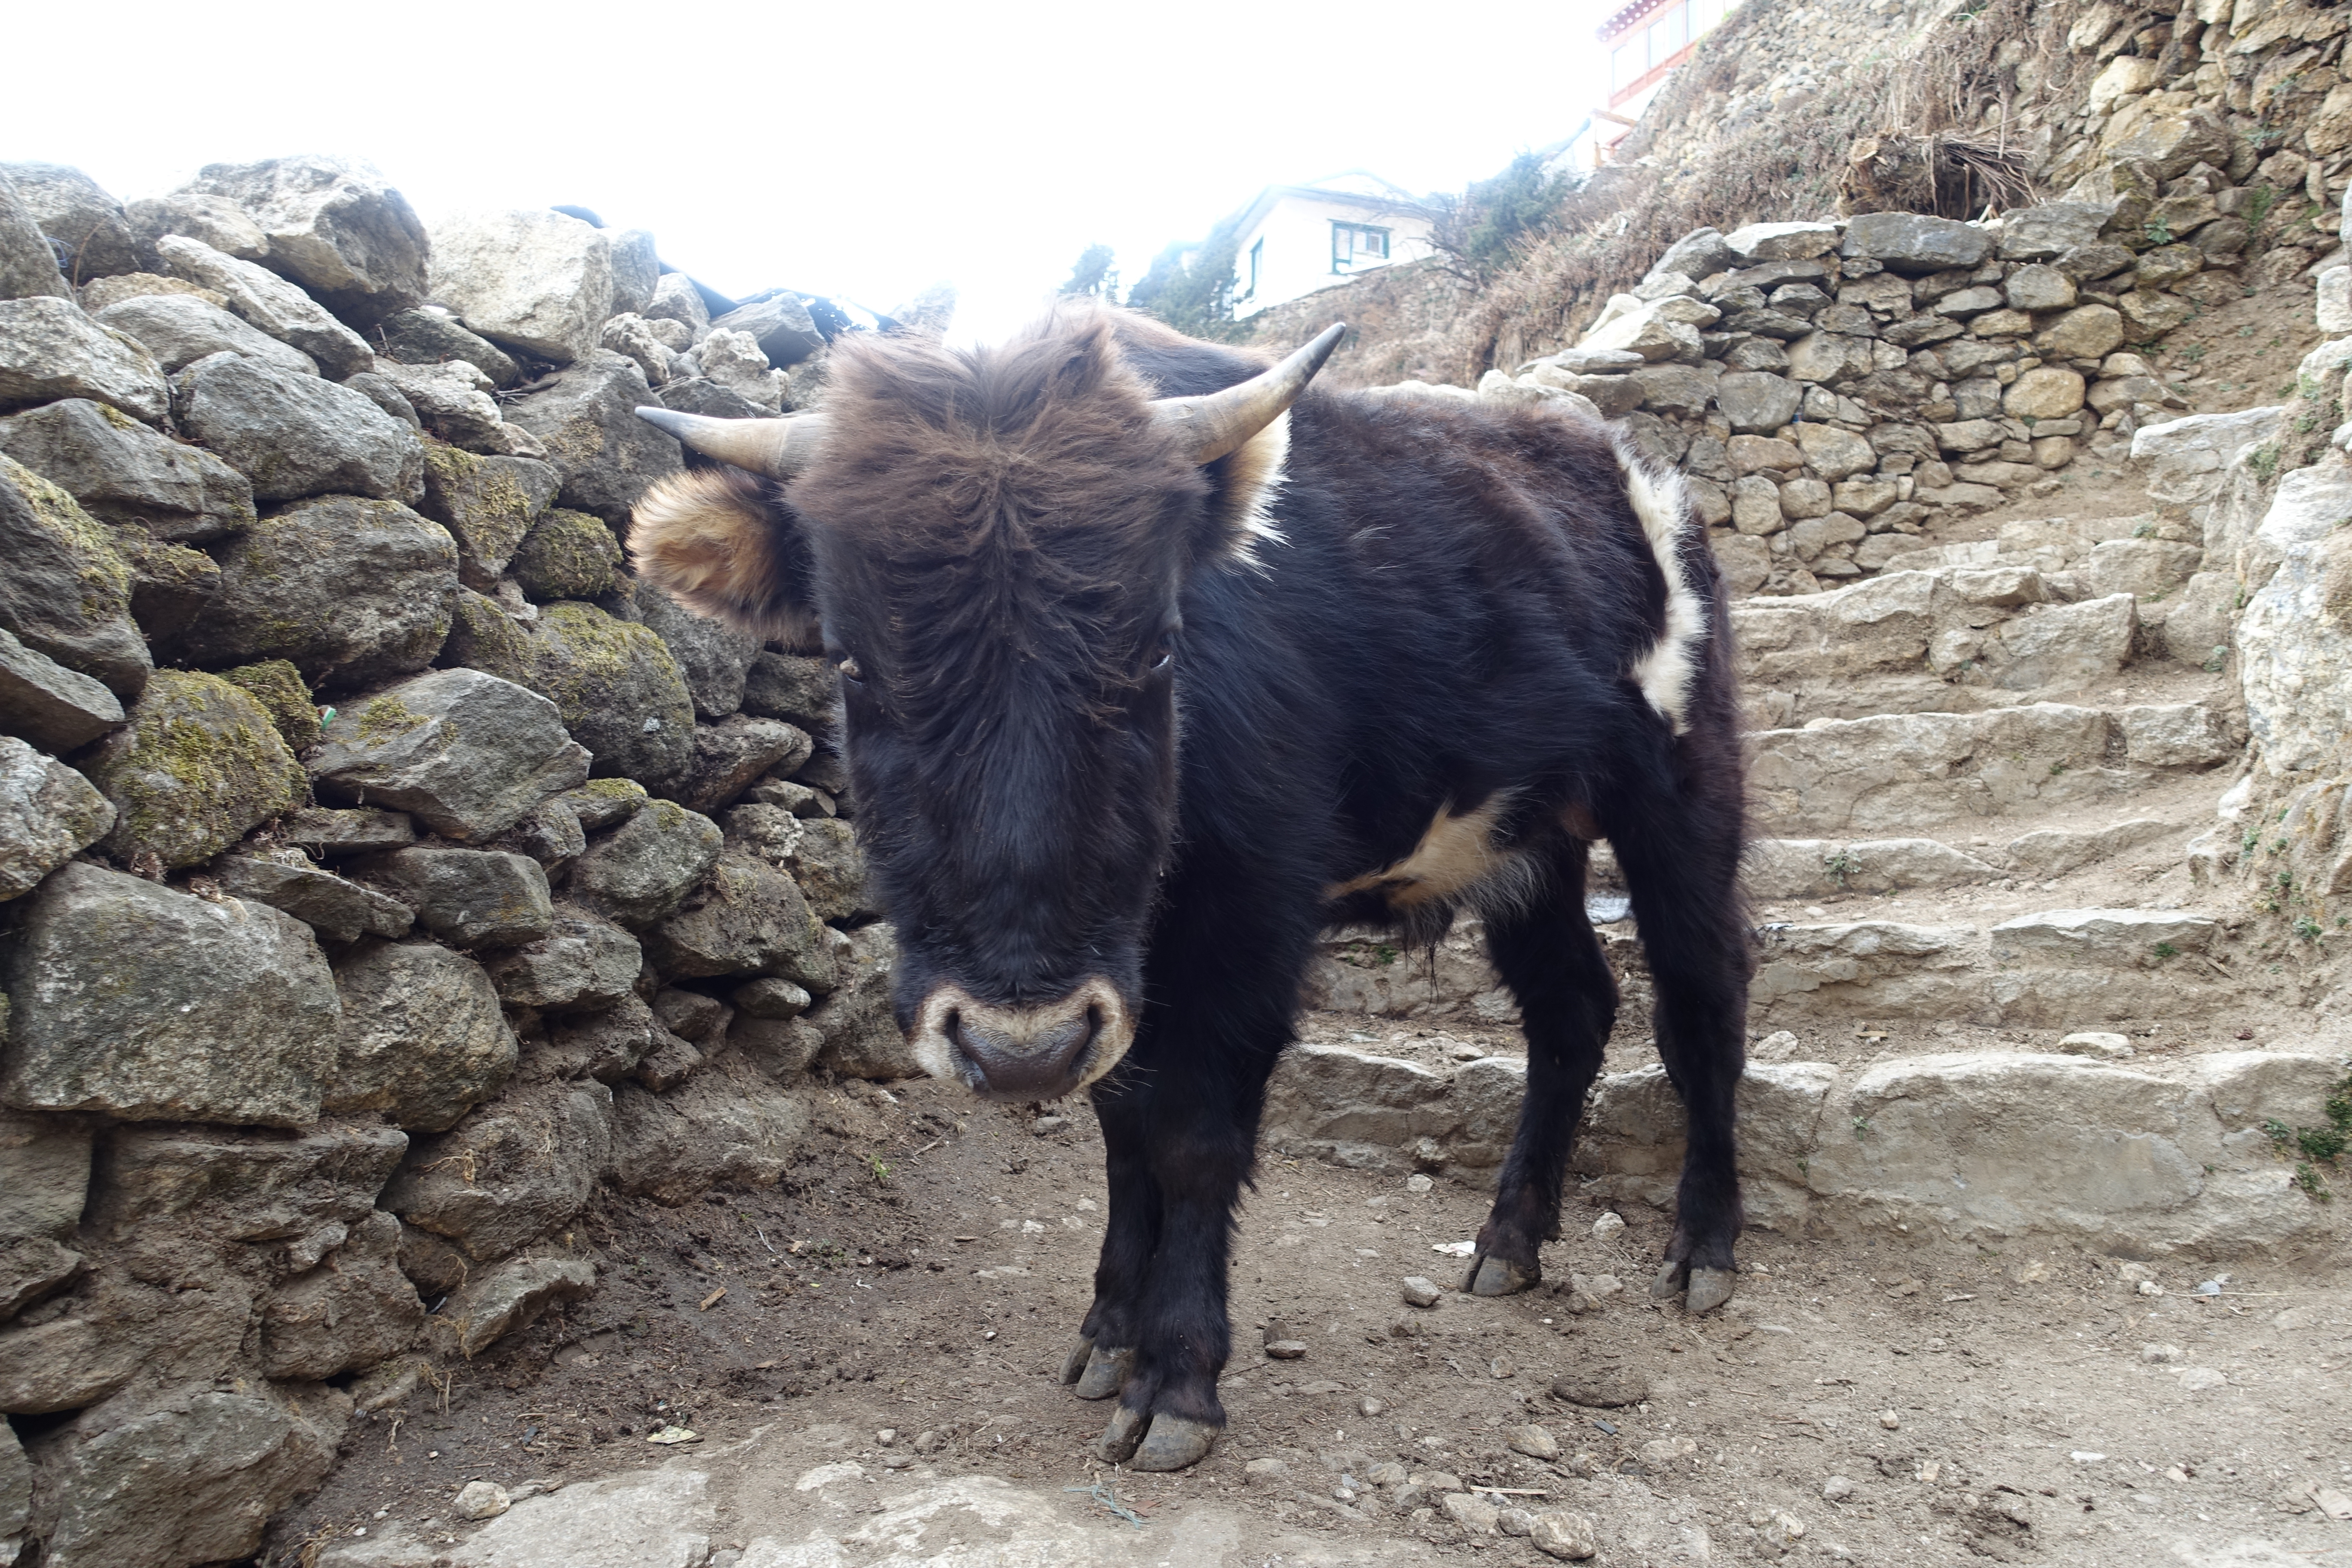 Cow of Namche